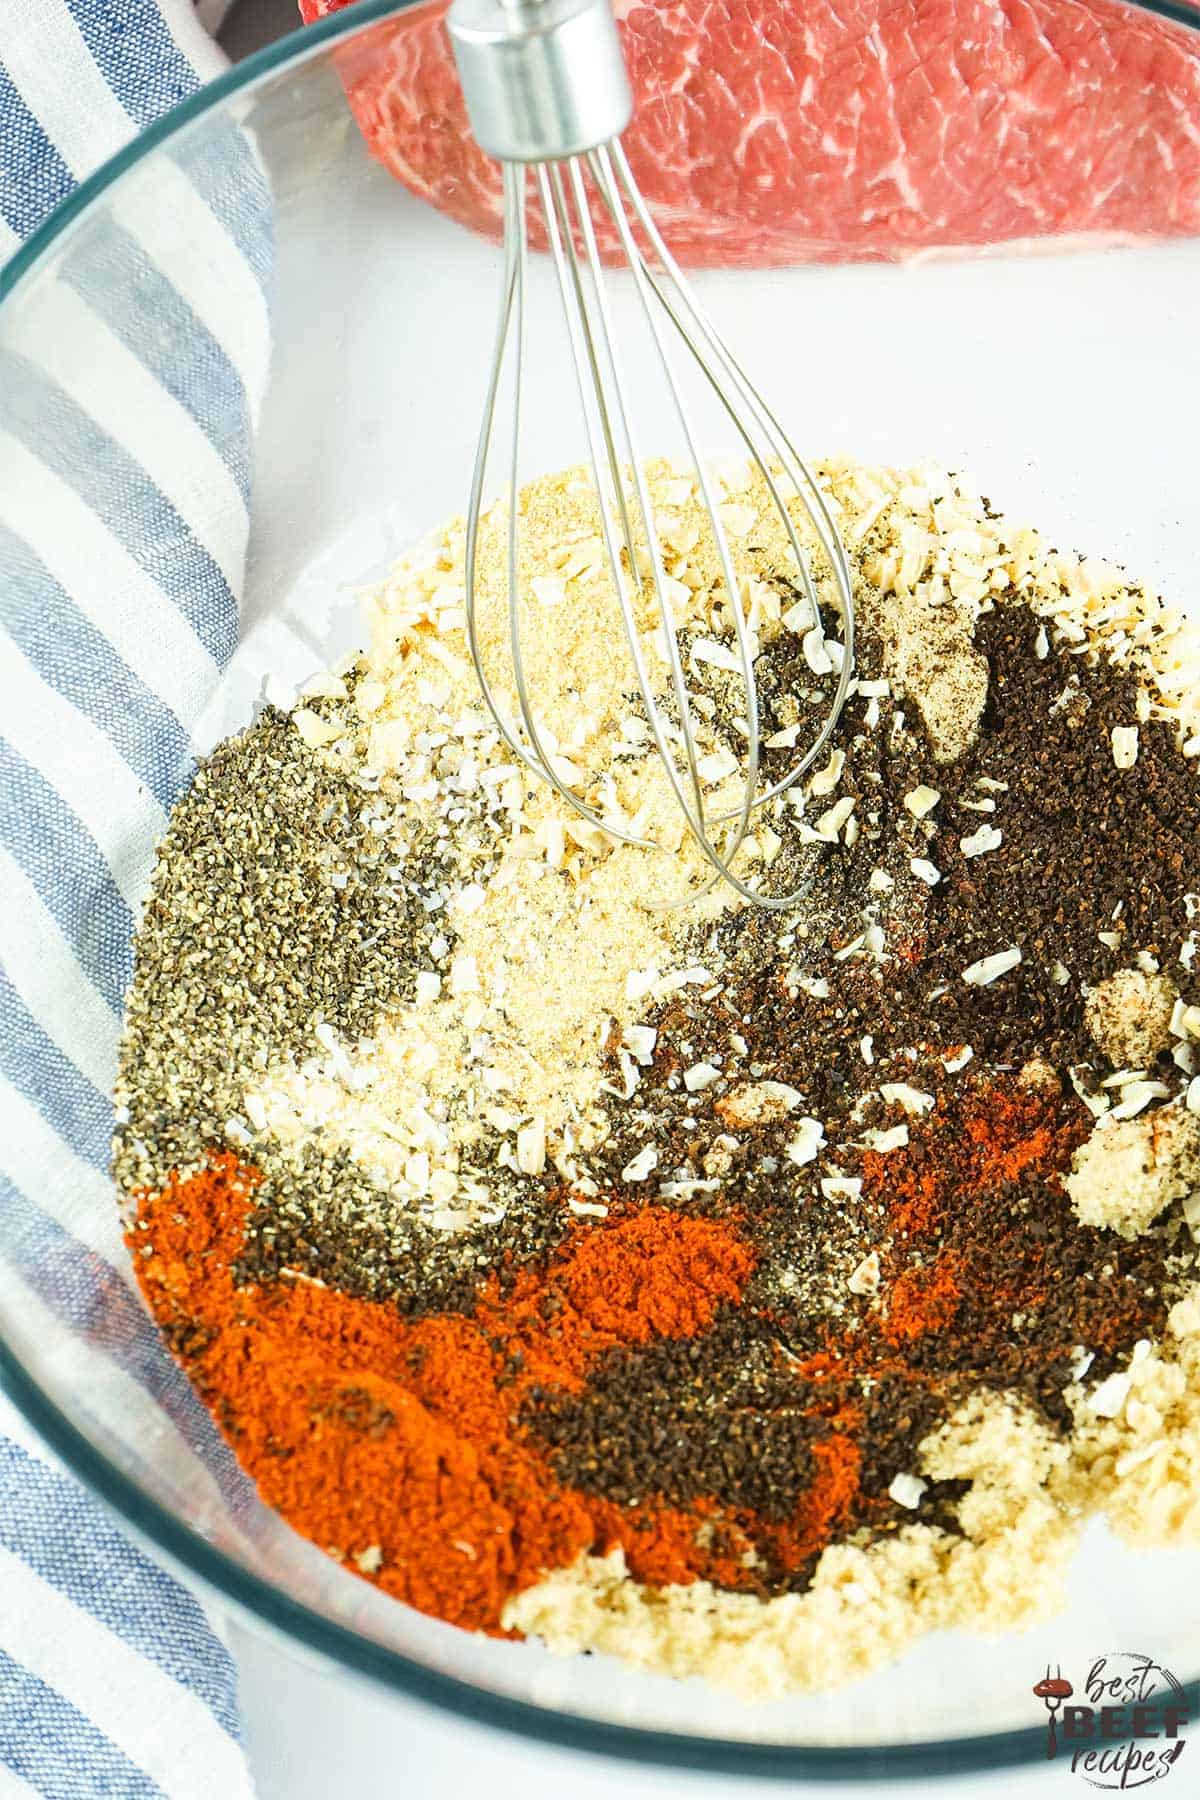 Coffee rub ingredients in a bowl